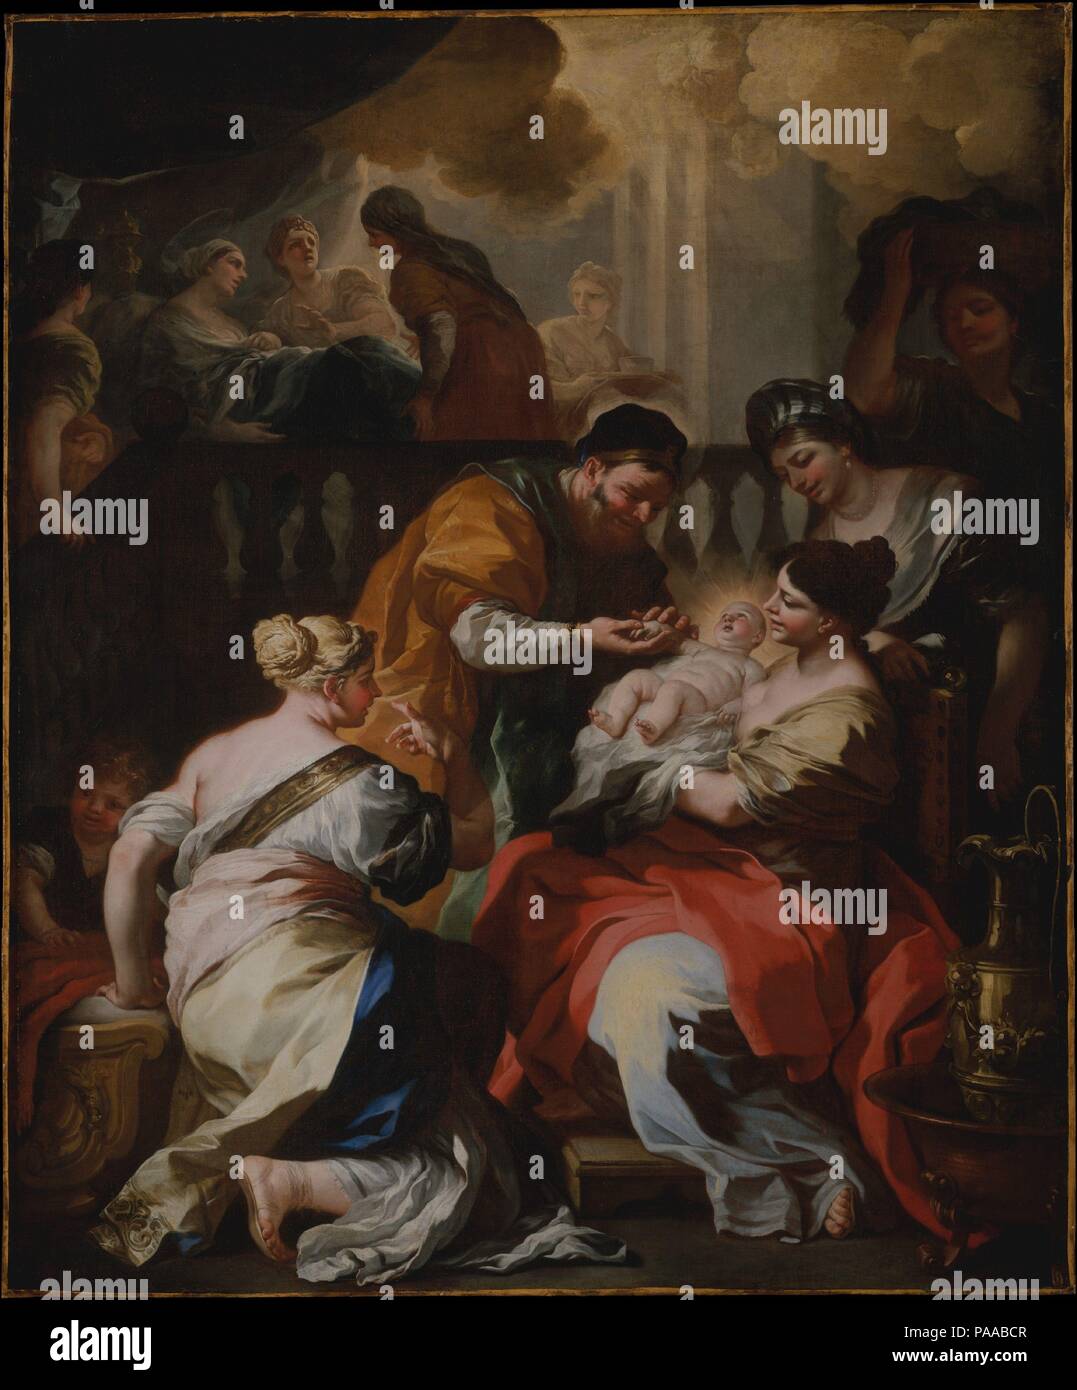 The Birth of the Virgin. Artist: Francesco Solimena (Italian, Canale di Serino 1657-1747 Barra). Dimensions: 80 1/2 x 67 1/4 in. (204.5 x 170.8 cm). Date: ca. 1690.  Painted in the 1690s, the picture must have served as an altarpiece in a church in Naples. In the foreground the infant Virgin Mary is shown to nurses and her adoring father, while in the distance, enveloped in a heavenly radiance, is the child's mother, Anna, lying in bed, attended by servants. Solimena became the leading painter of Naples, training a generation of artists. However, in this painting, with its dark shadows and vig Stock Photo